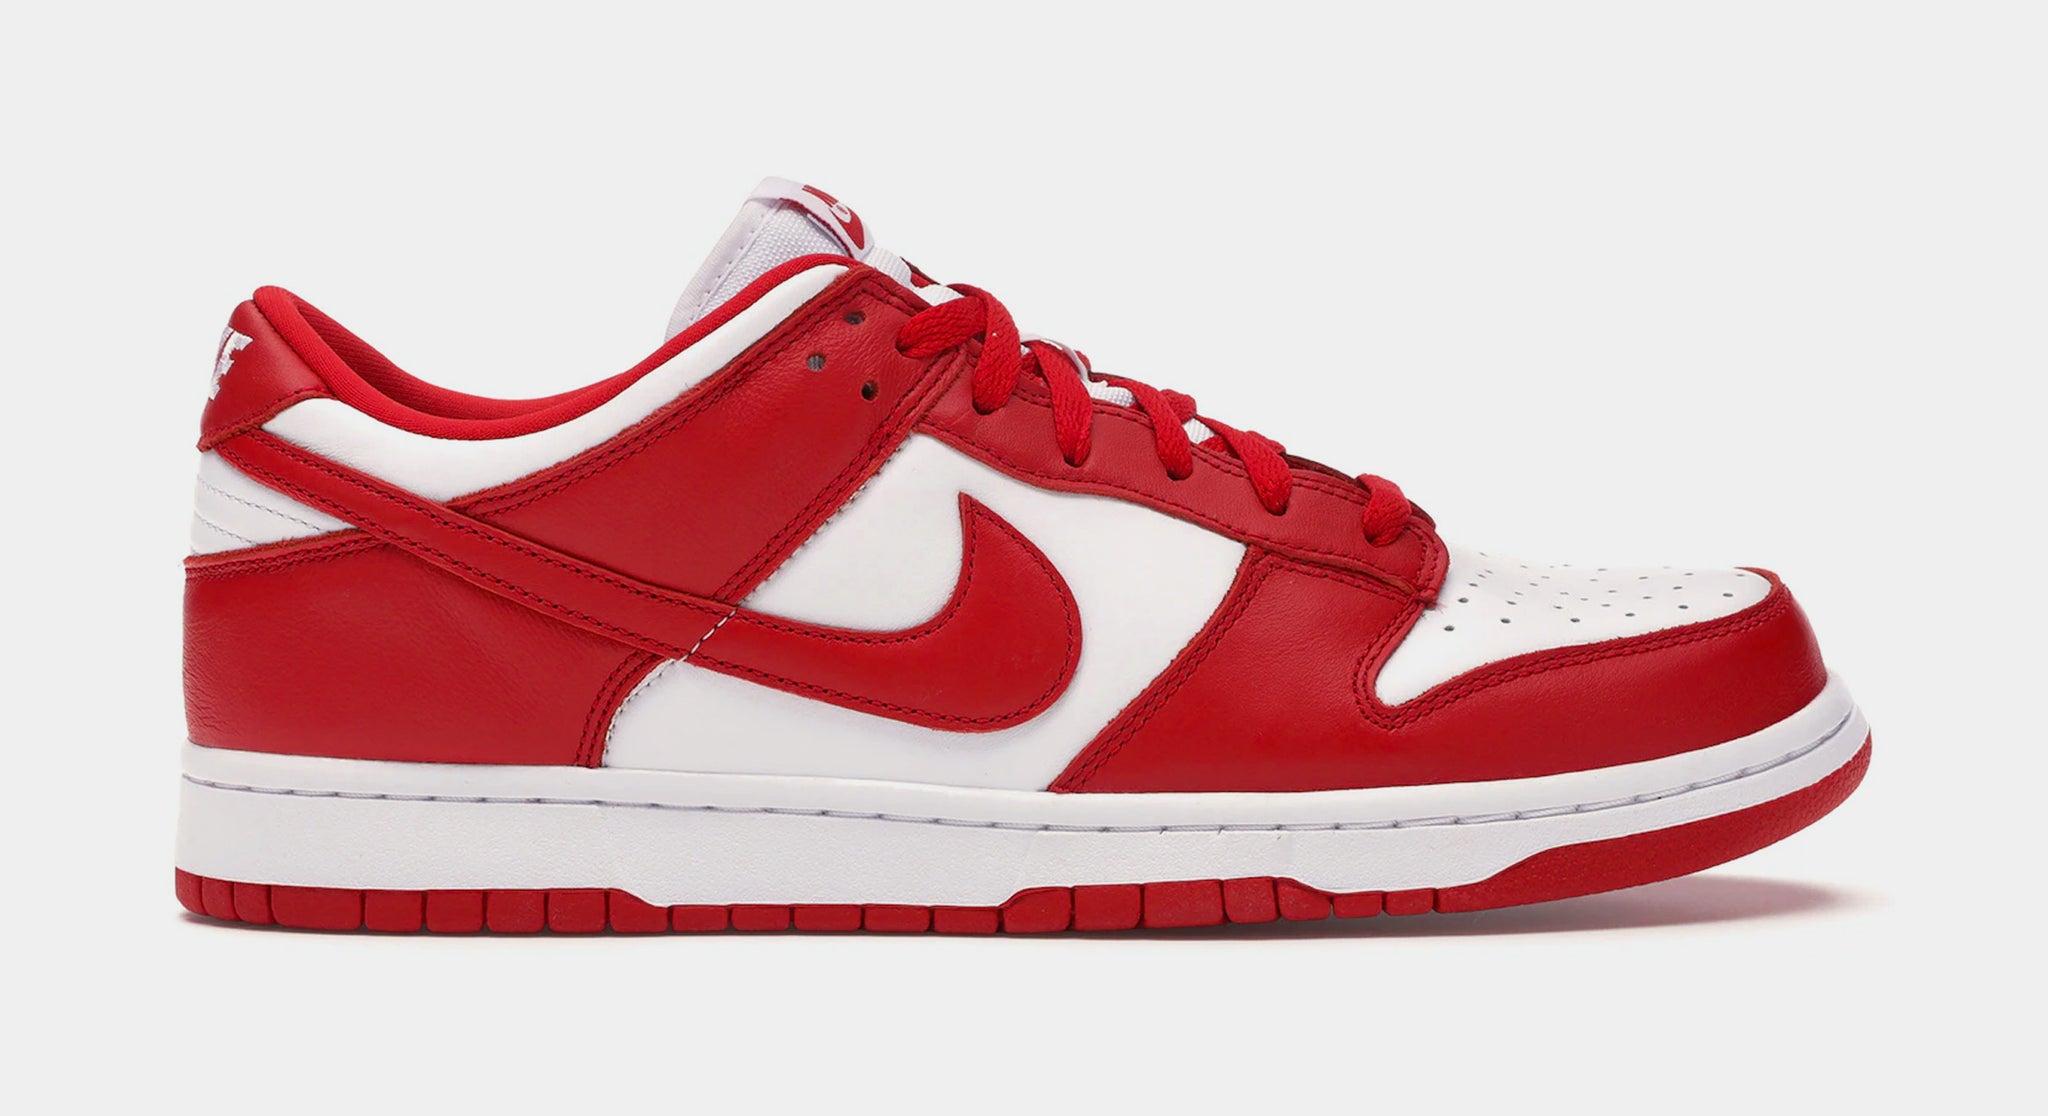 Nike Dunk Low White and University Red Mens Lifestyle Shoes White